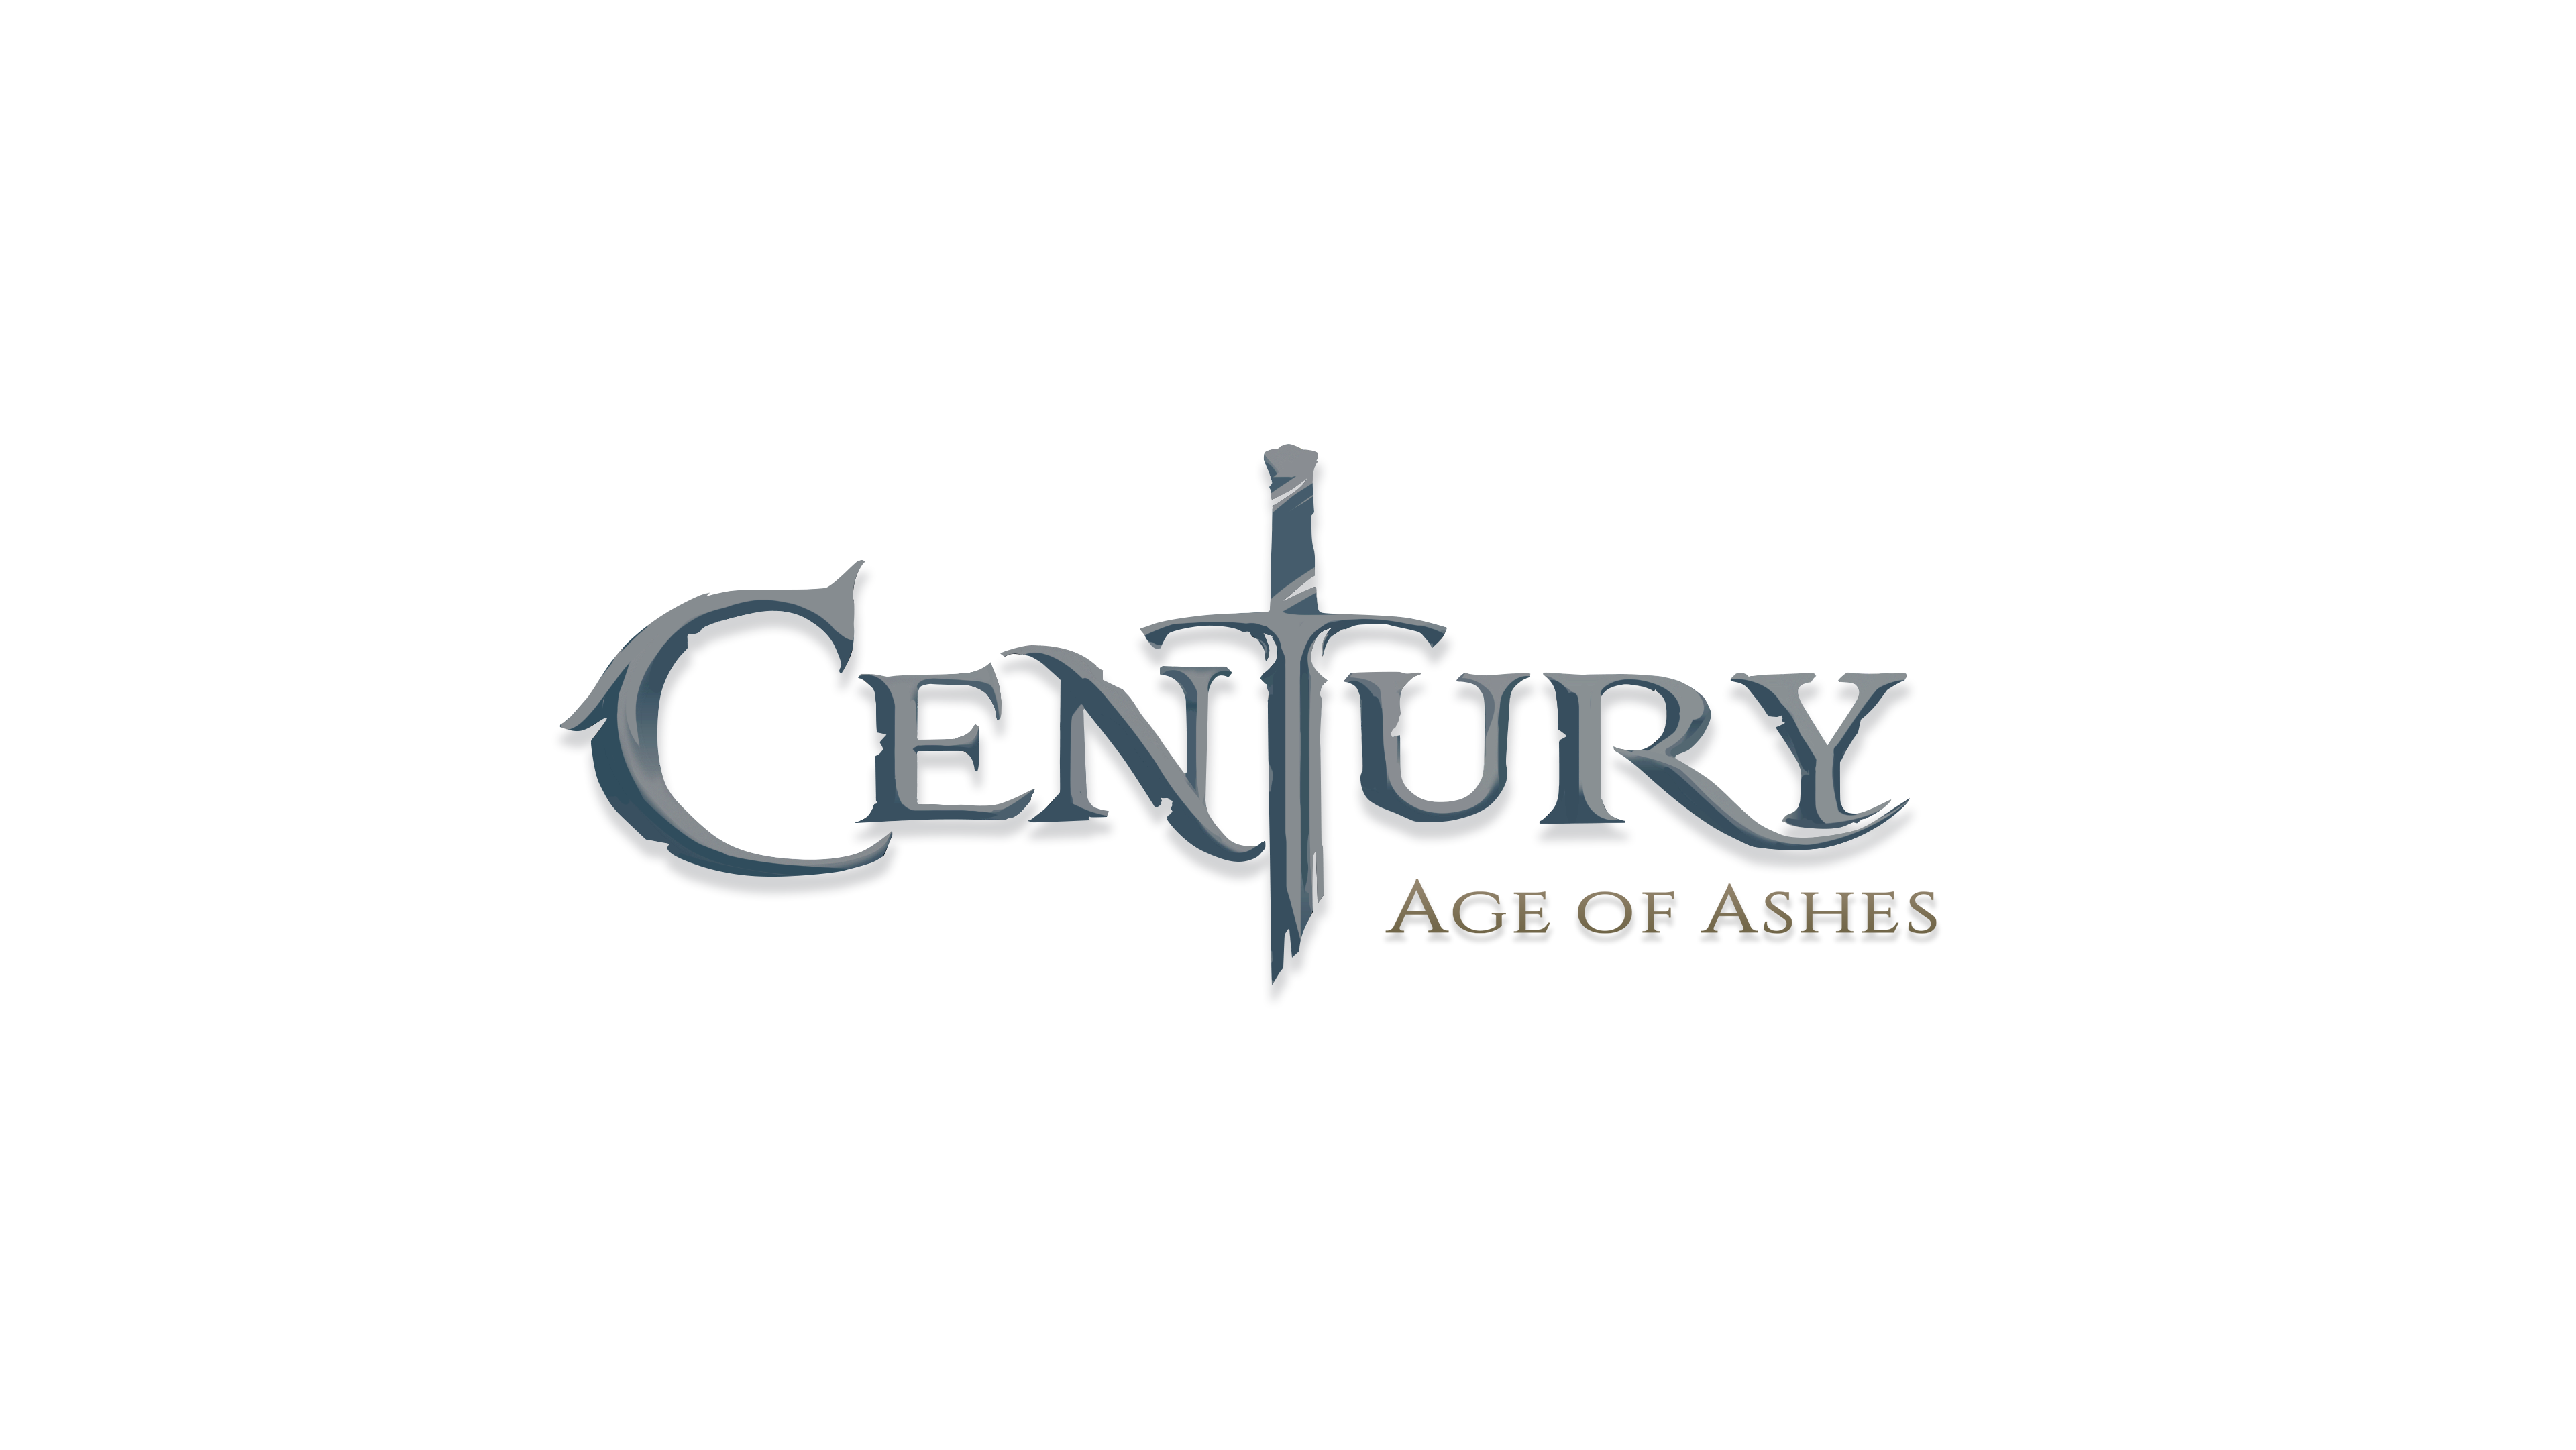 Video Game Century: Age of Ashes HD Wallpaper | Background Image